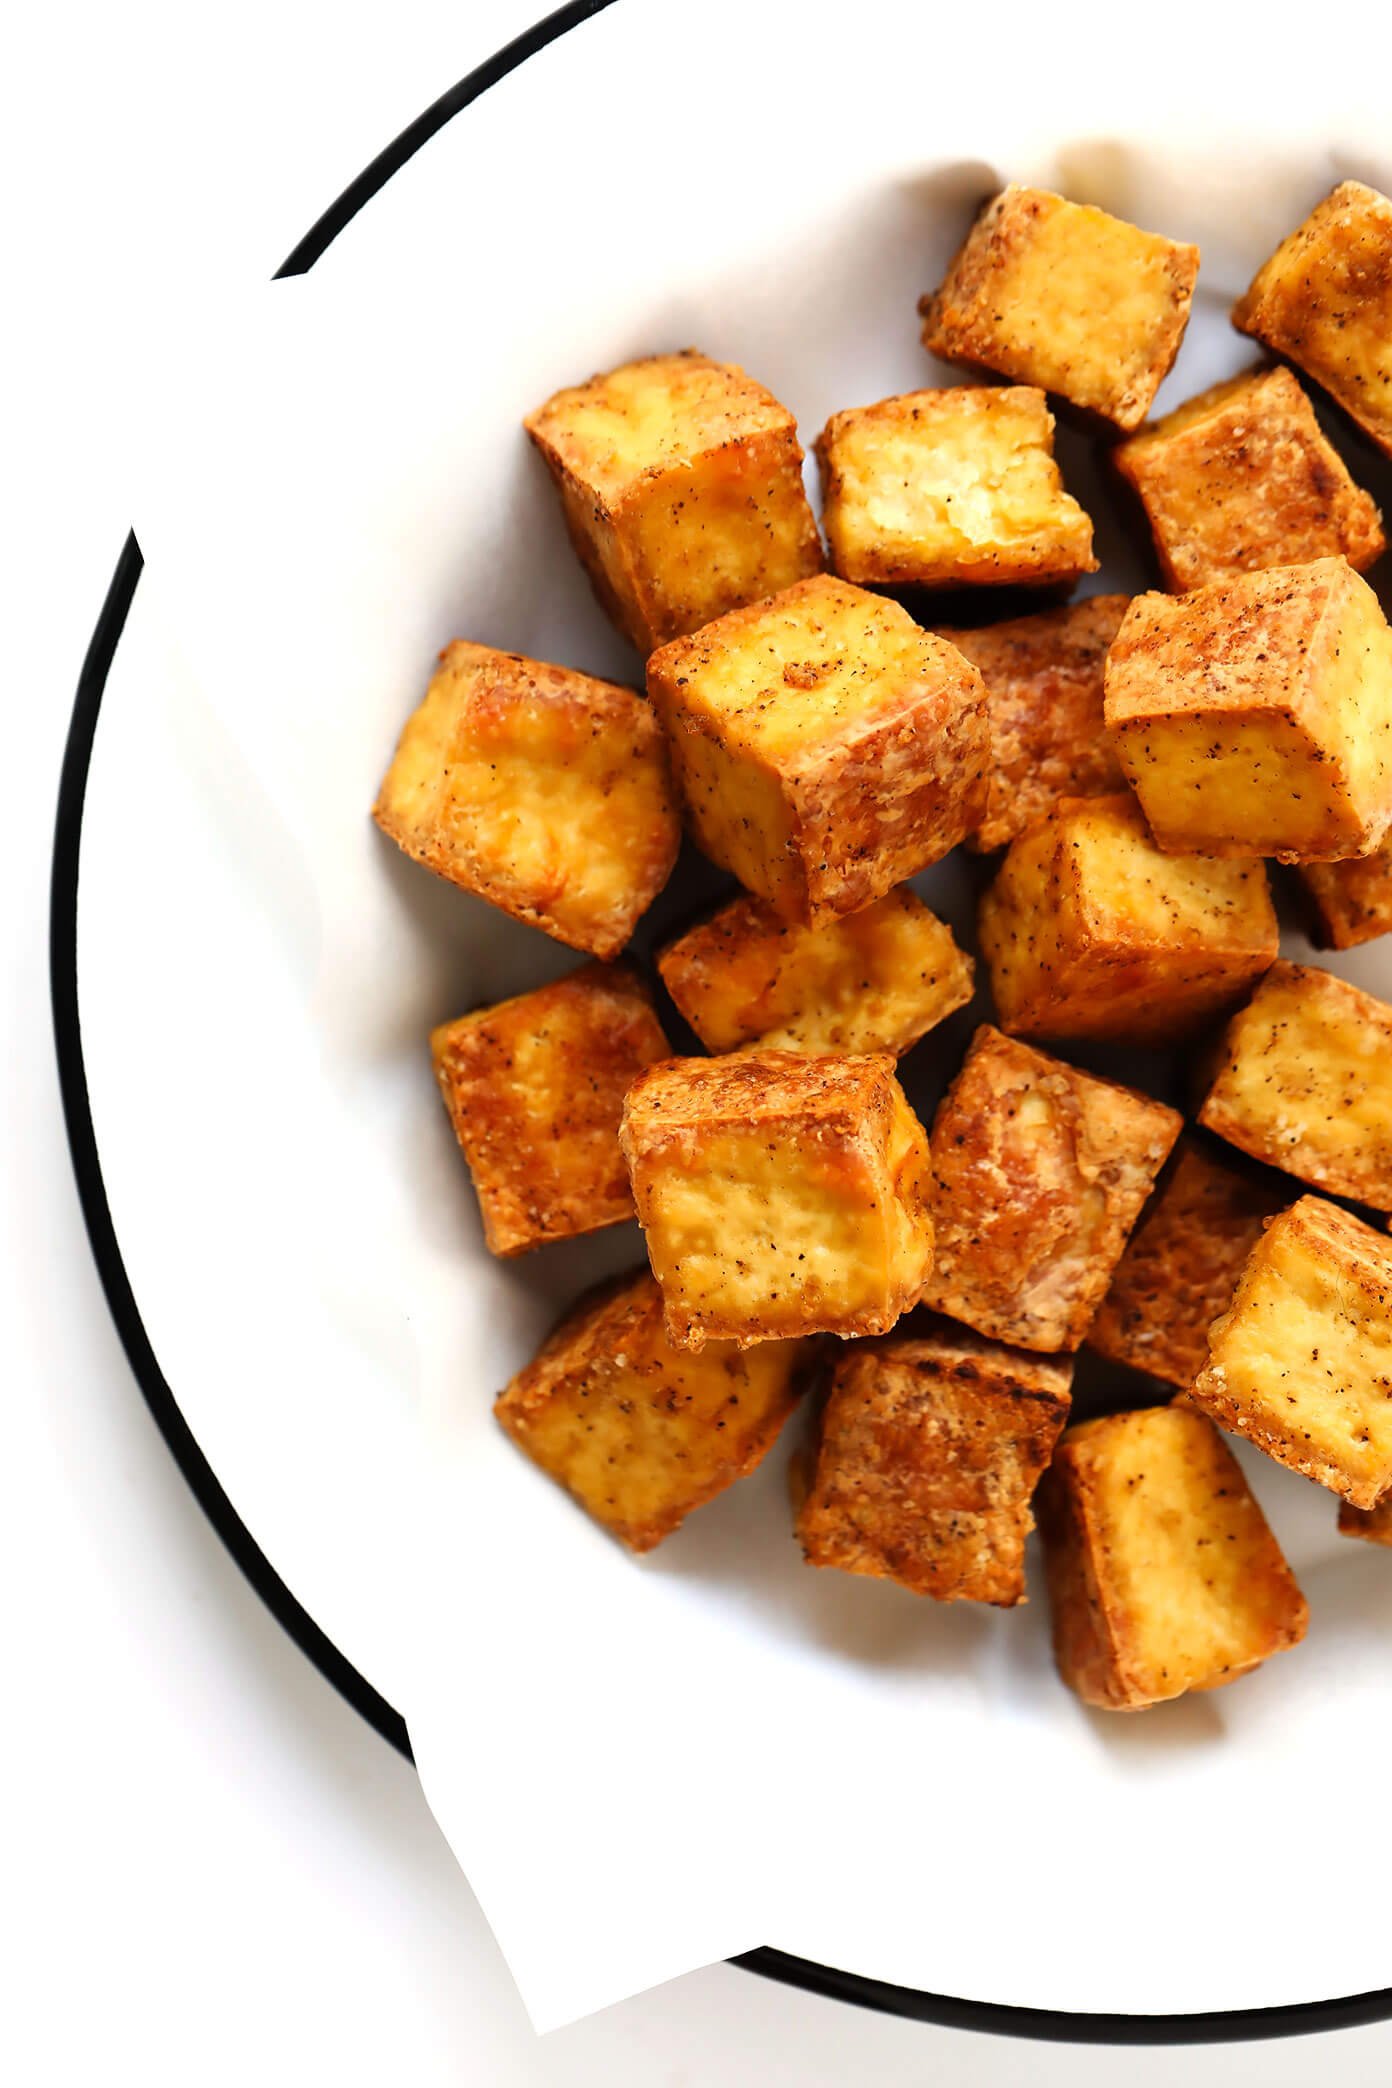 How To Make Baked Tofu Gimme Some Oven,Getting Rid Of Poison Ivy On Skin